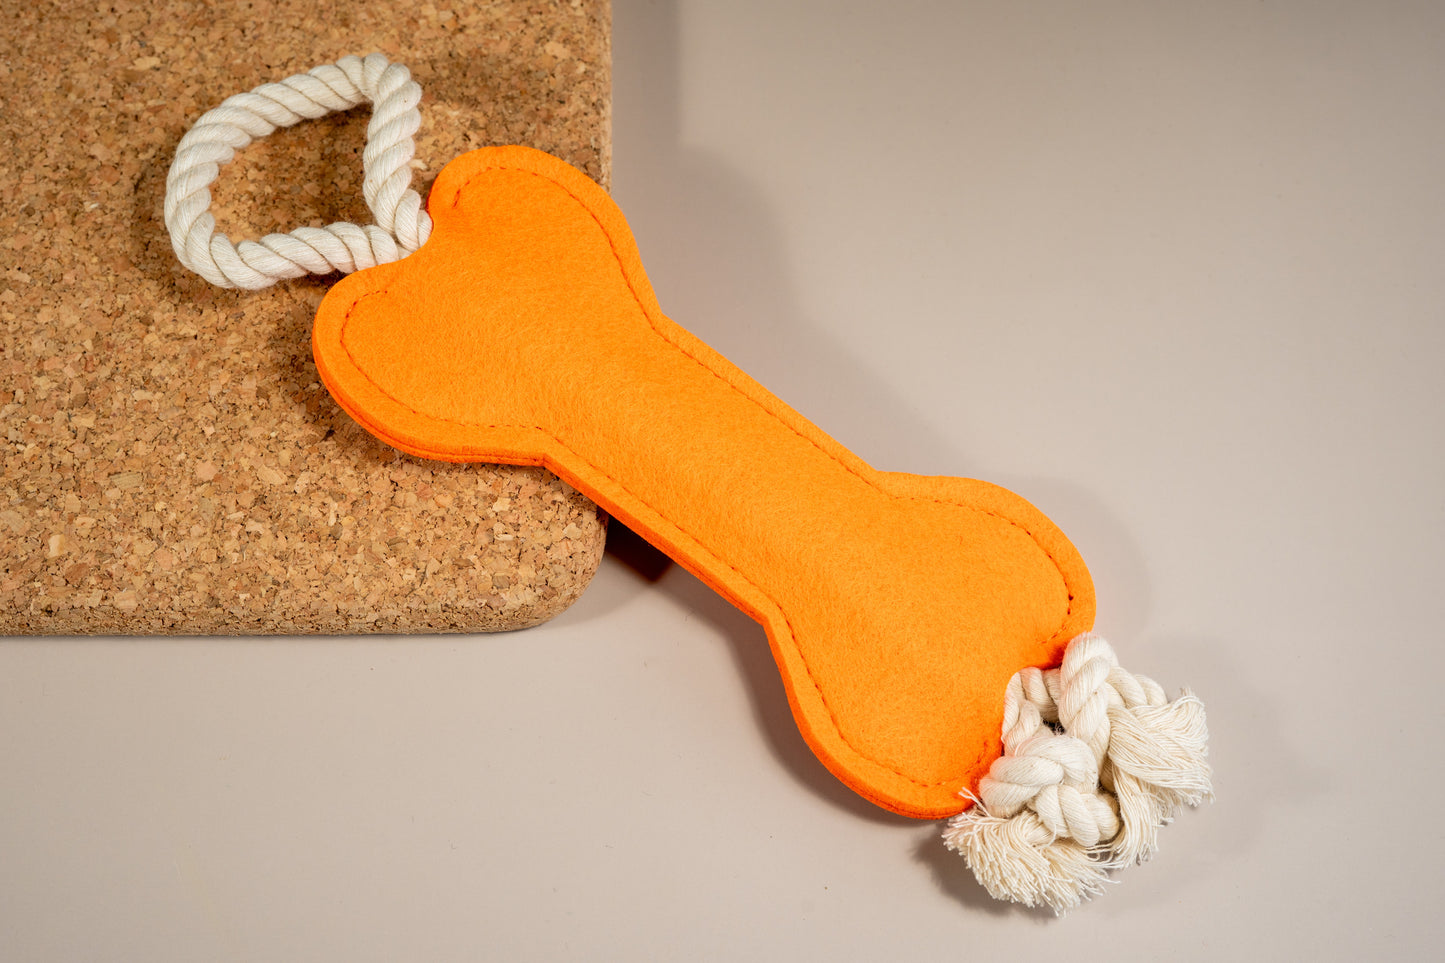 Bright orange felt bone dog toy with rope at the ends placed on cork board.